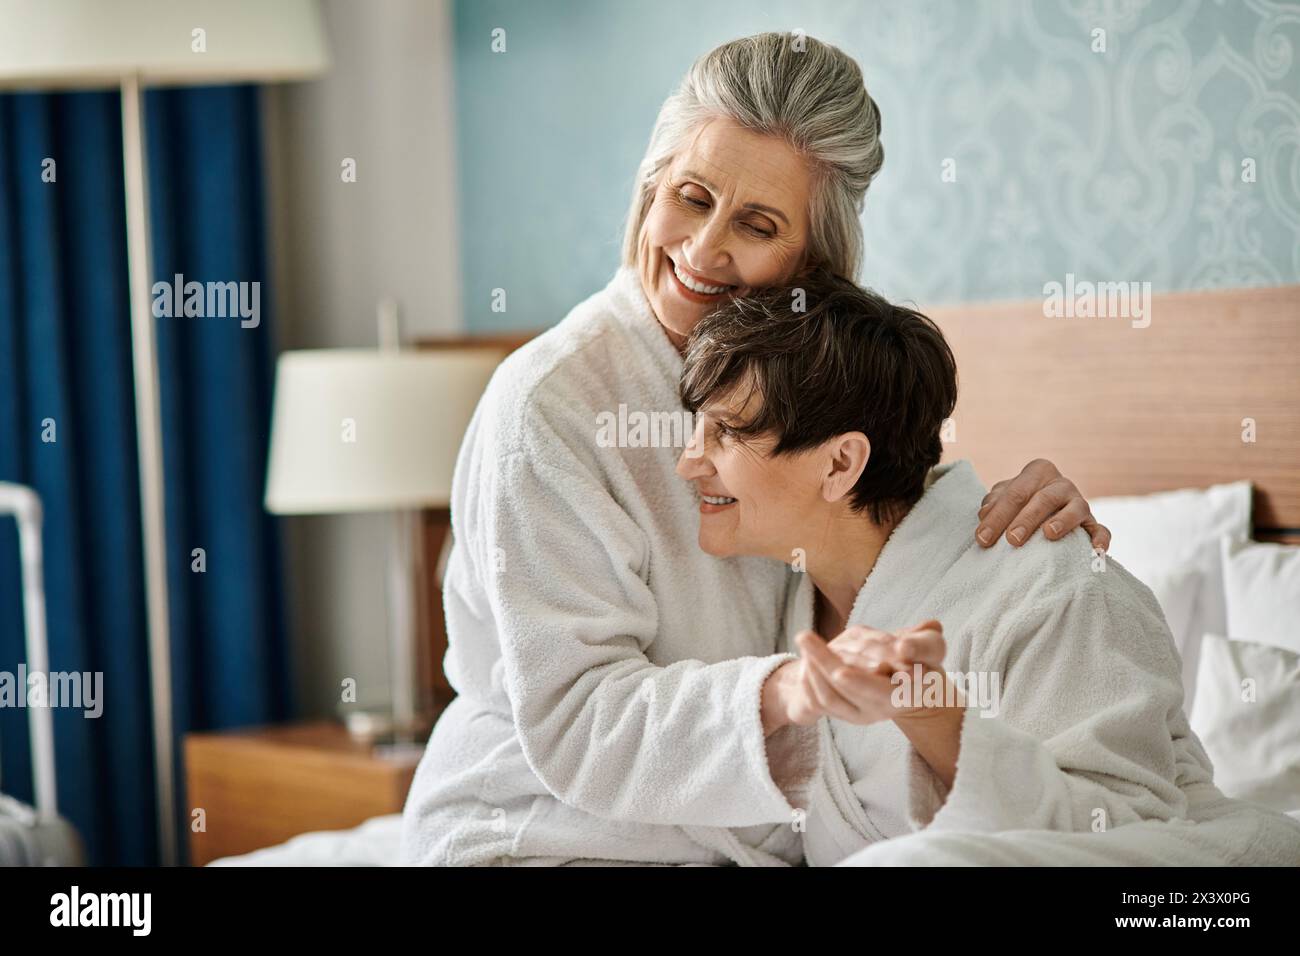 A senior lesbian couple sharing a tender moment in a bed, with a woman in a white robe embracing her partner. Stock Photo